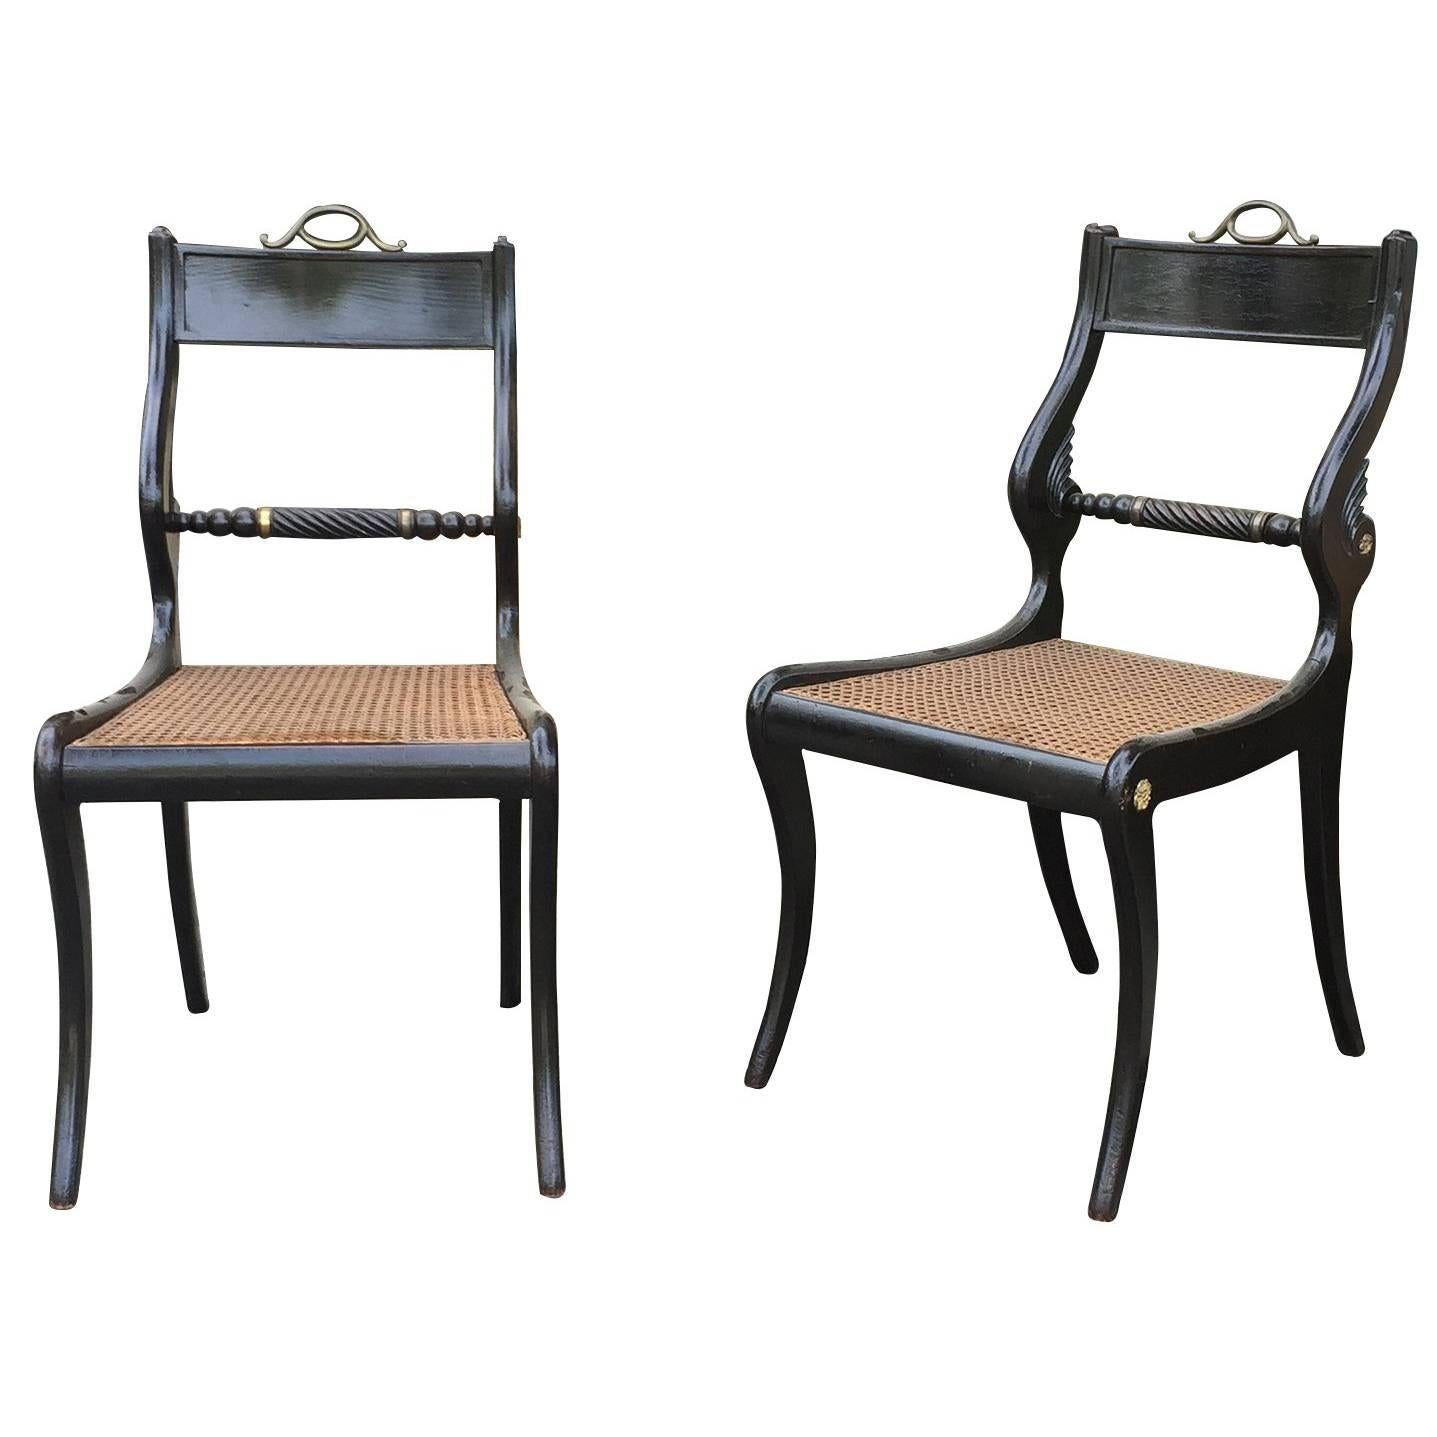 Pair of 19th Century English Regency Side Chairs